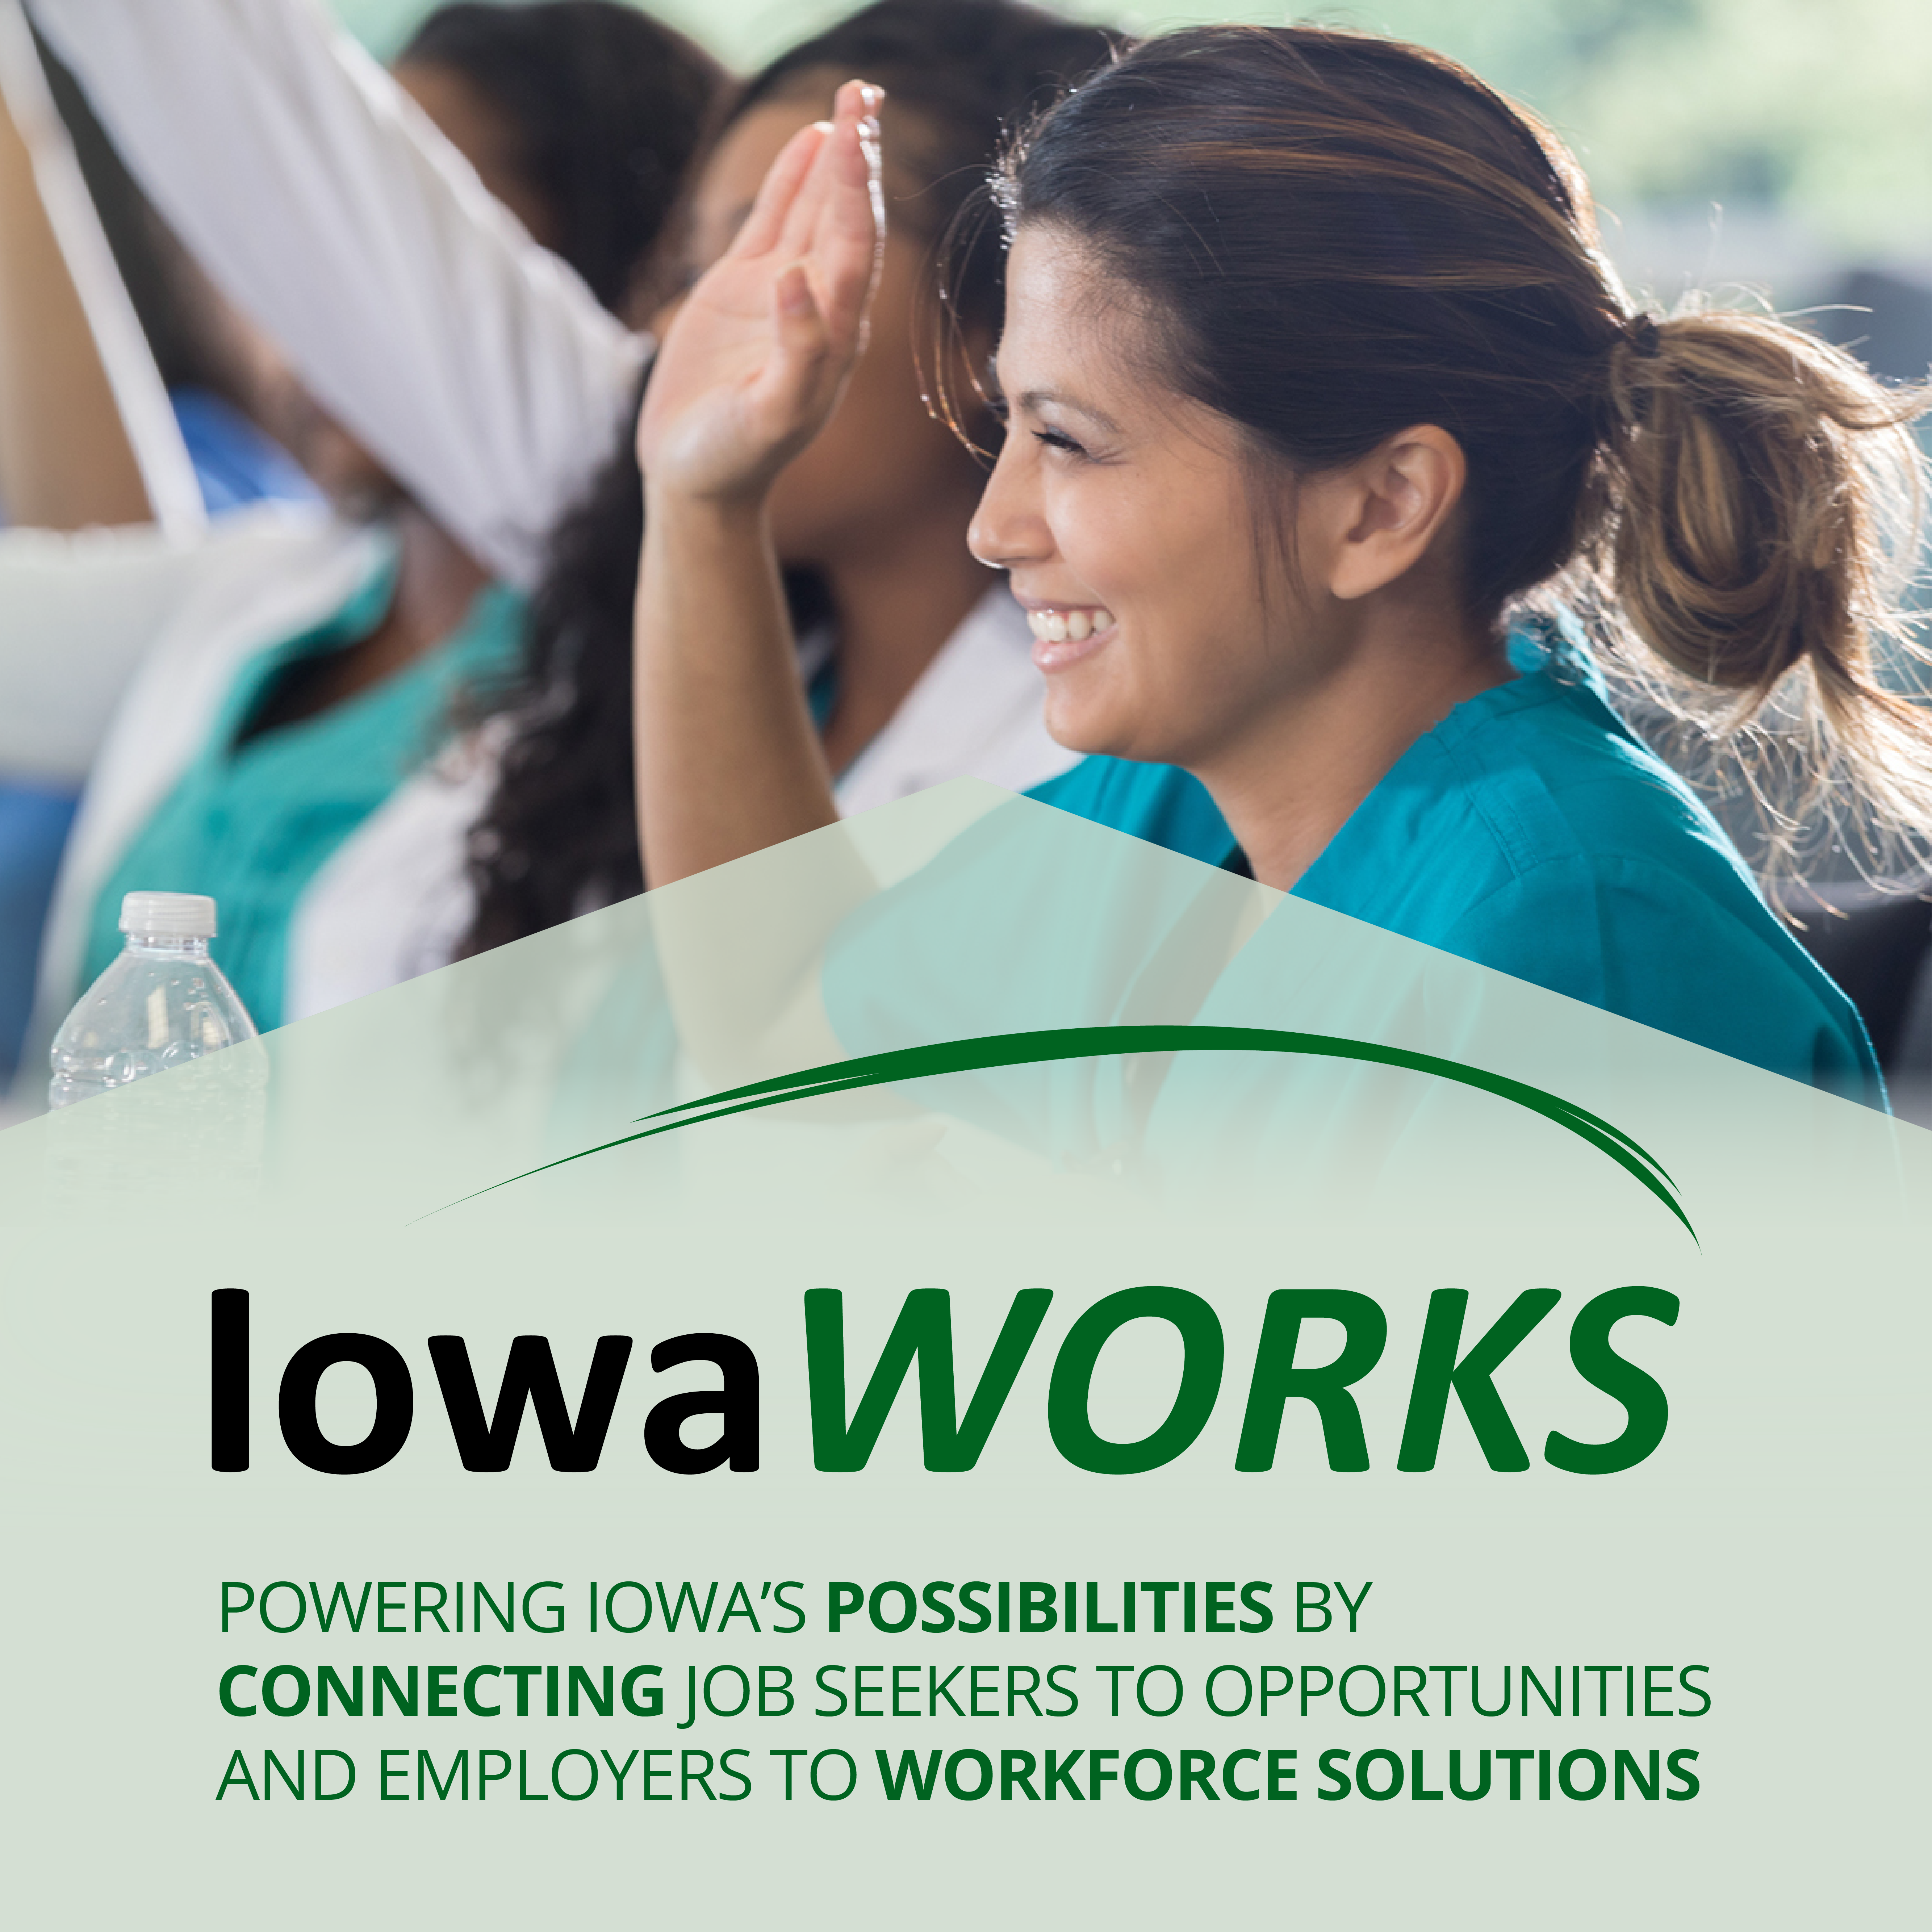 IowaWORKS: Powering Iowa's Possibilities by connecting job seekers to opportunities and employers to workforce solutions. Image features smiling women wearing medical scrubs raising their hands